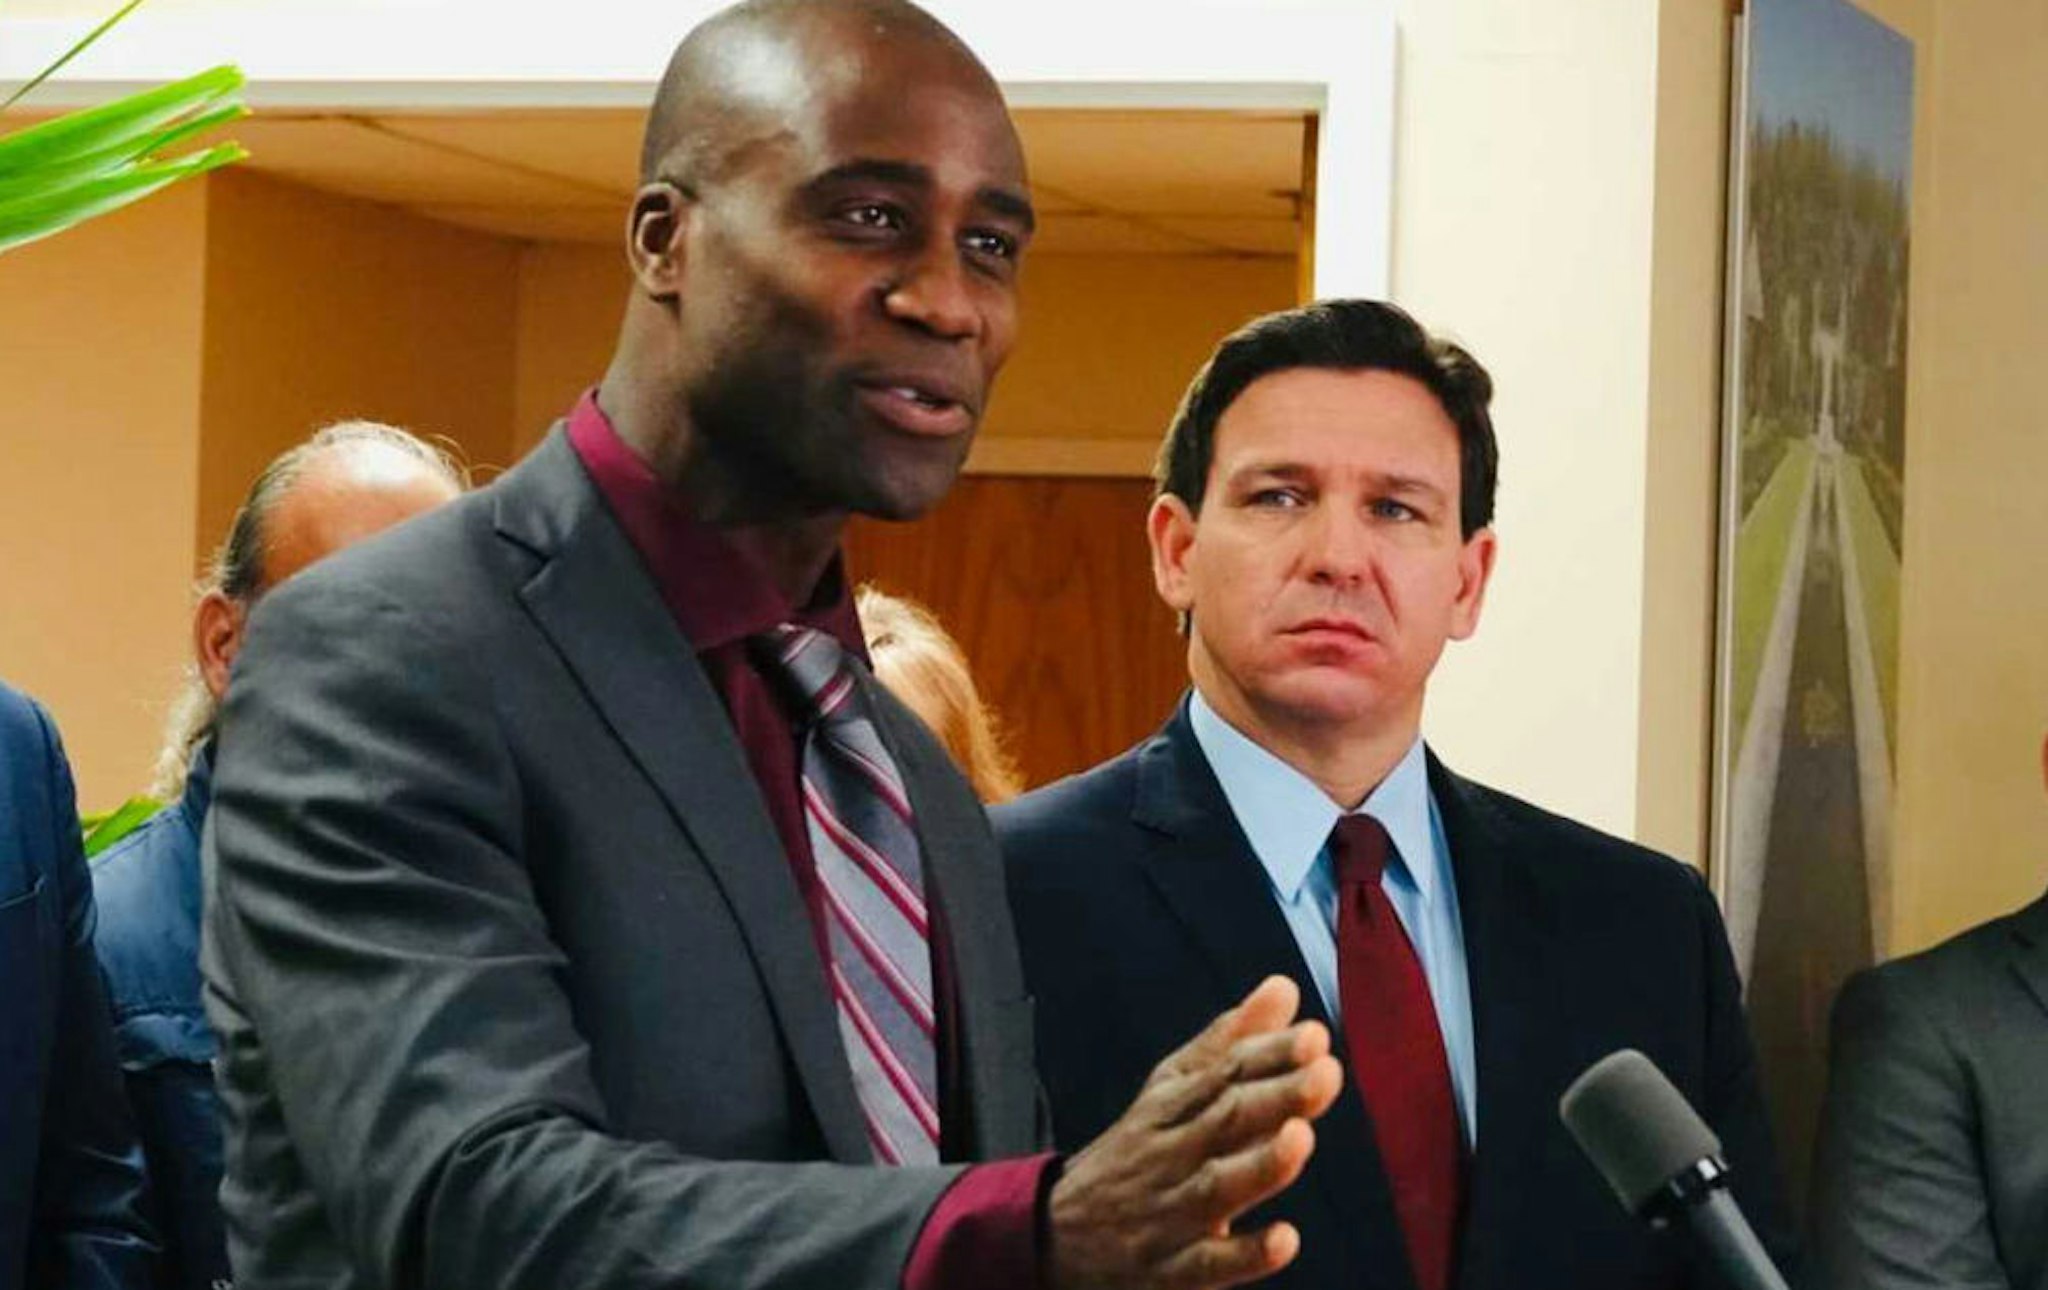 Florida Surgeon General Joseph Ladapo and Gov. Ron DeSantis at a news conference in West Palm Beach, Florida on Thursday, Jan. 6, 2022.